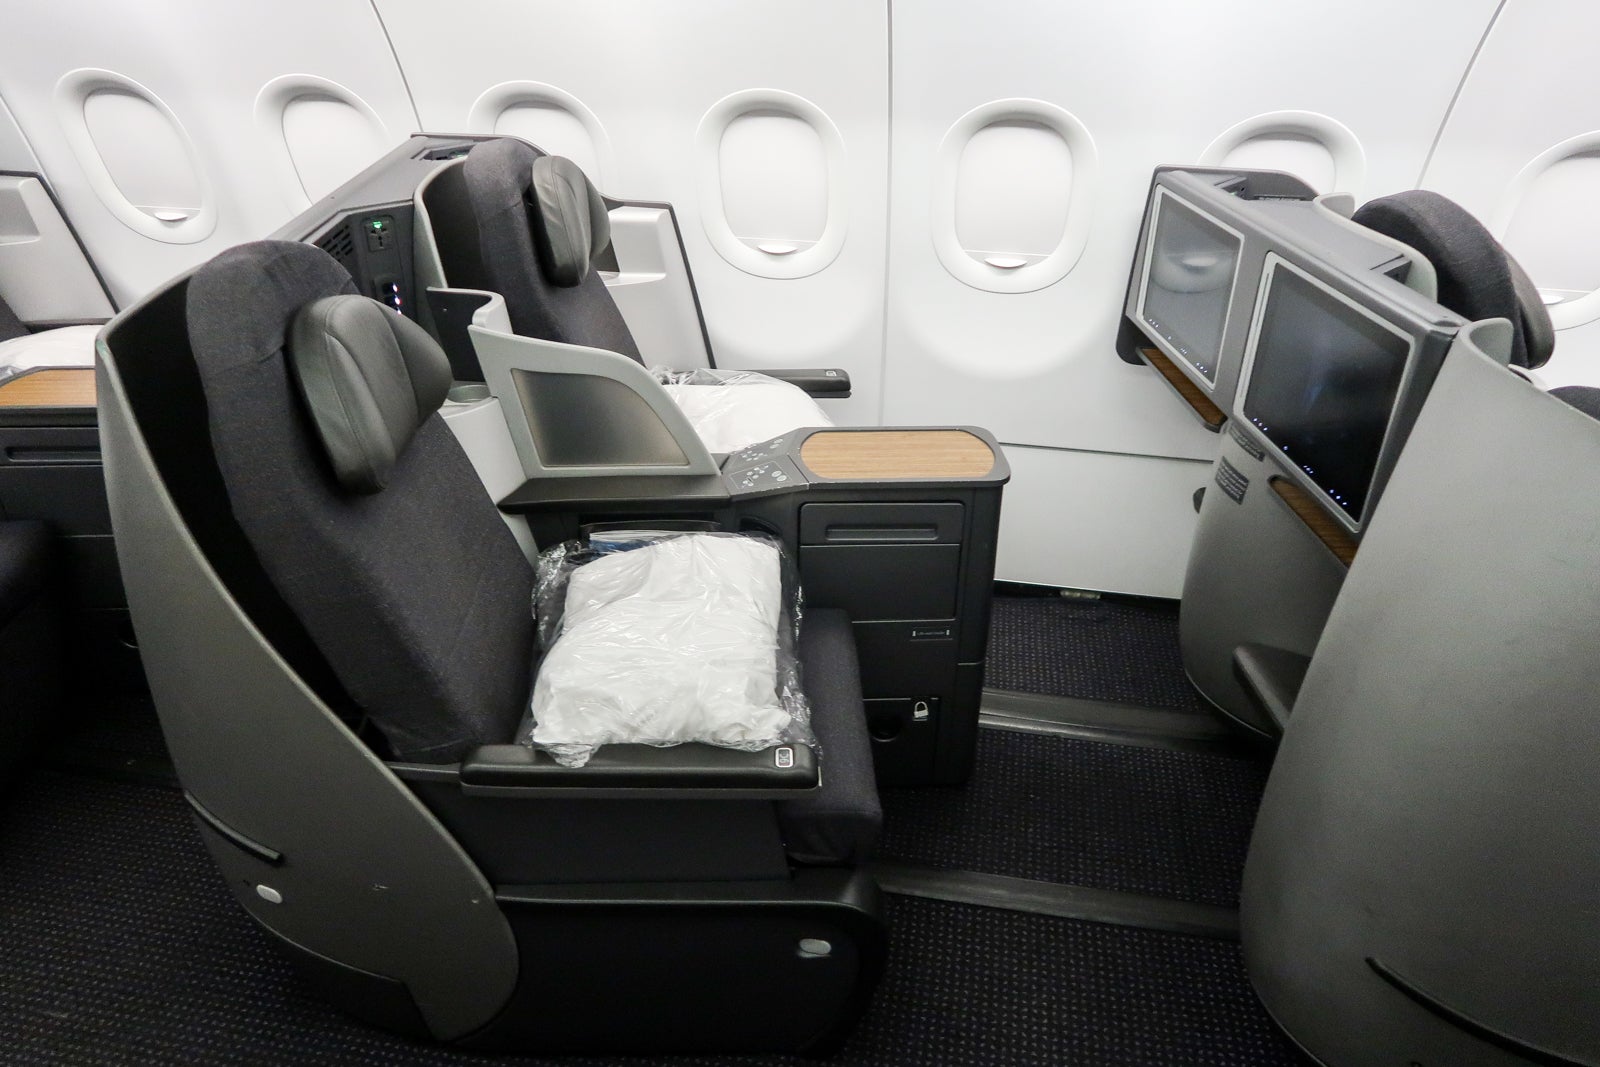 How to extend your expiring upgrade certificates on AA, Delta and ...